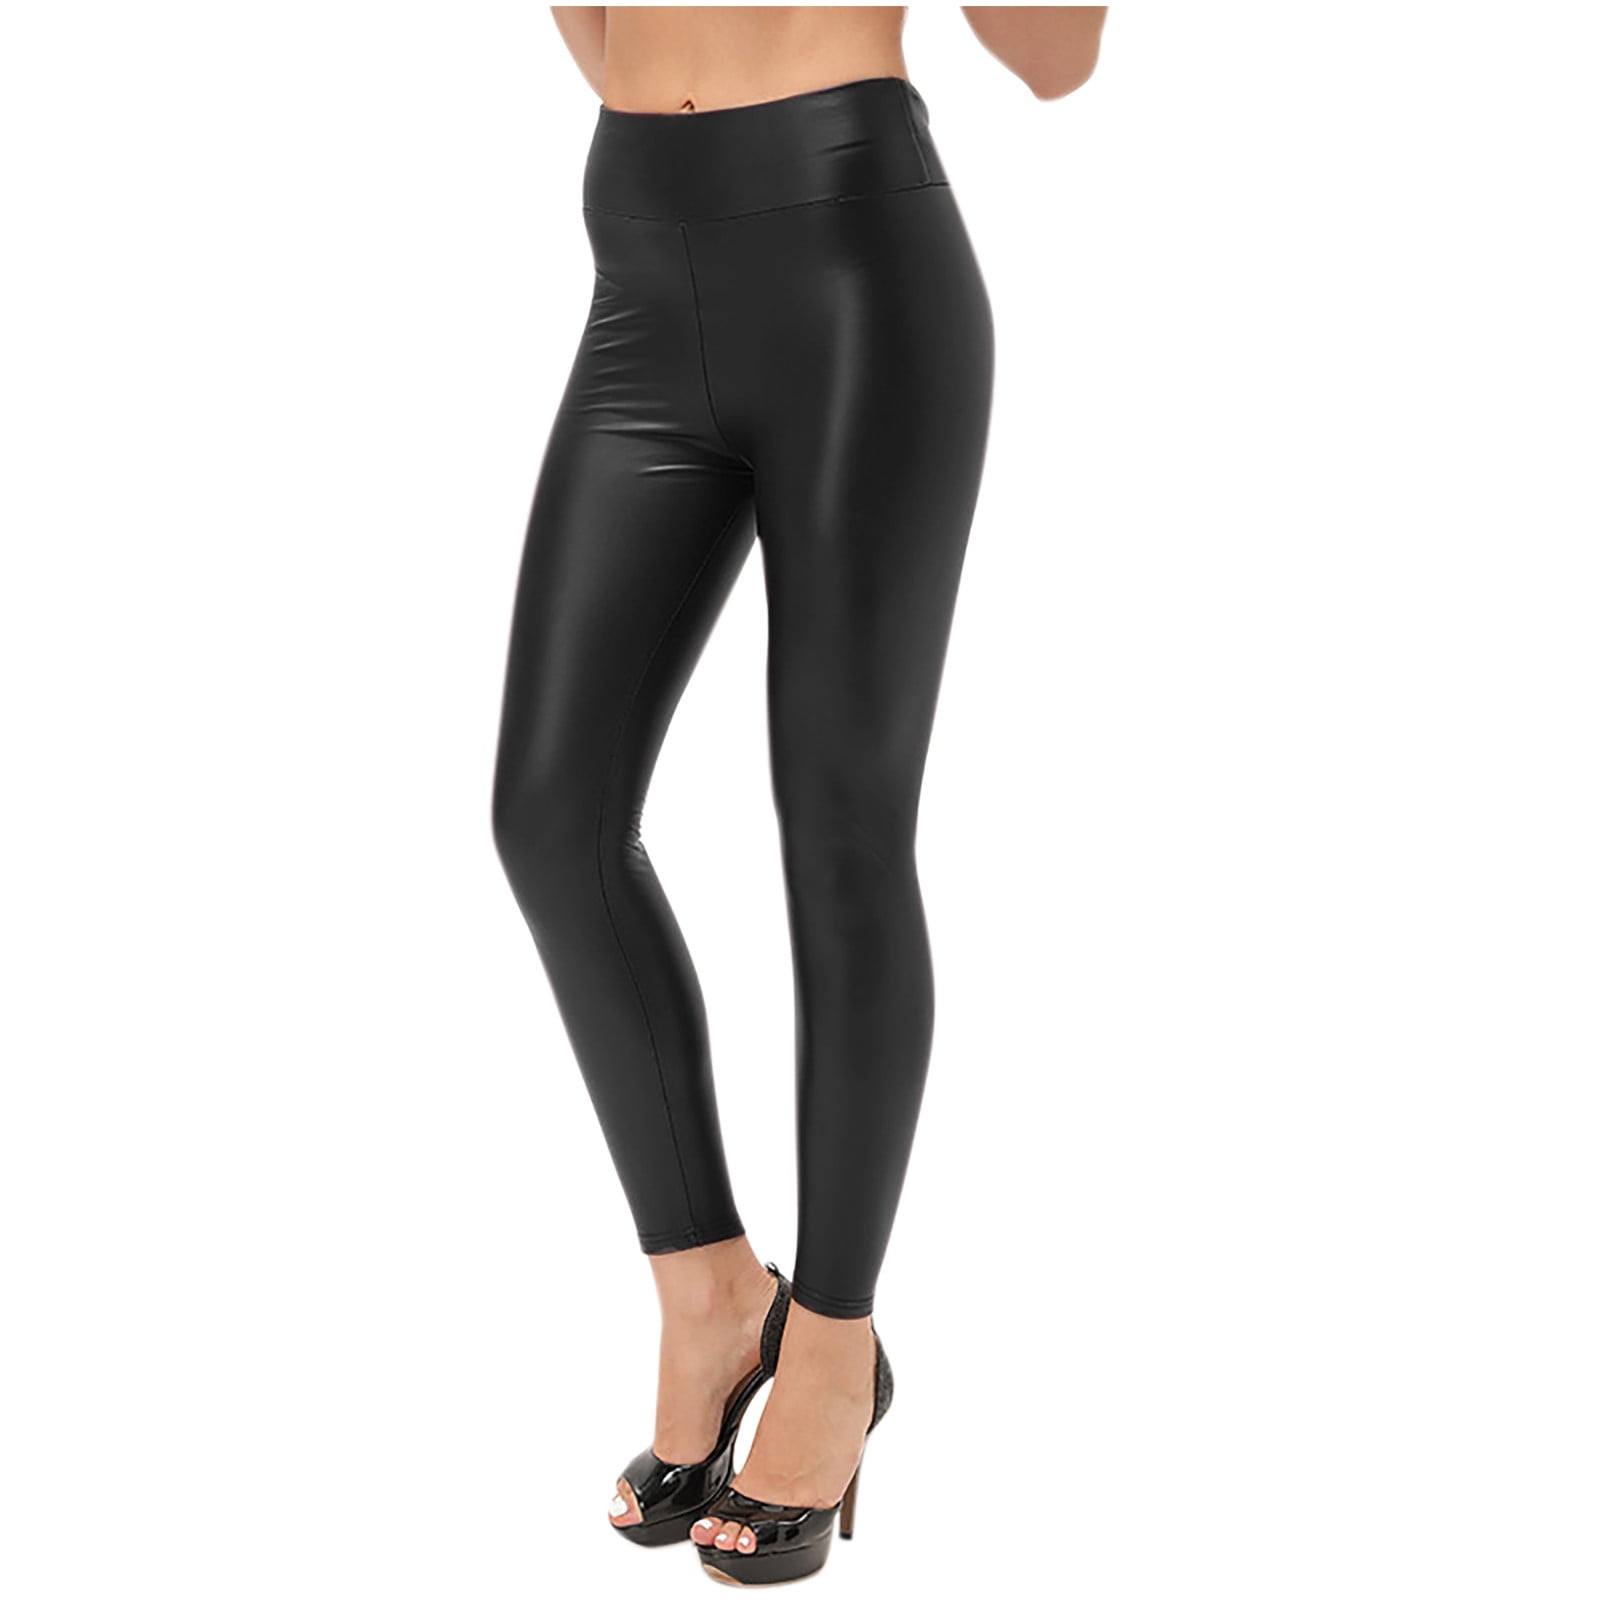 Leather Leggings Pants for Women High Waisted Pleather Pants Stretch Sexy  Plus Size Leather Pants for Women 